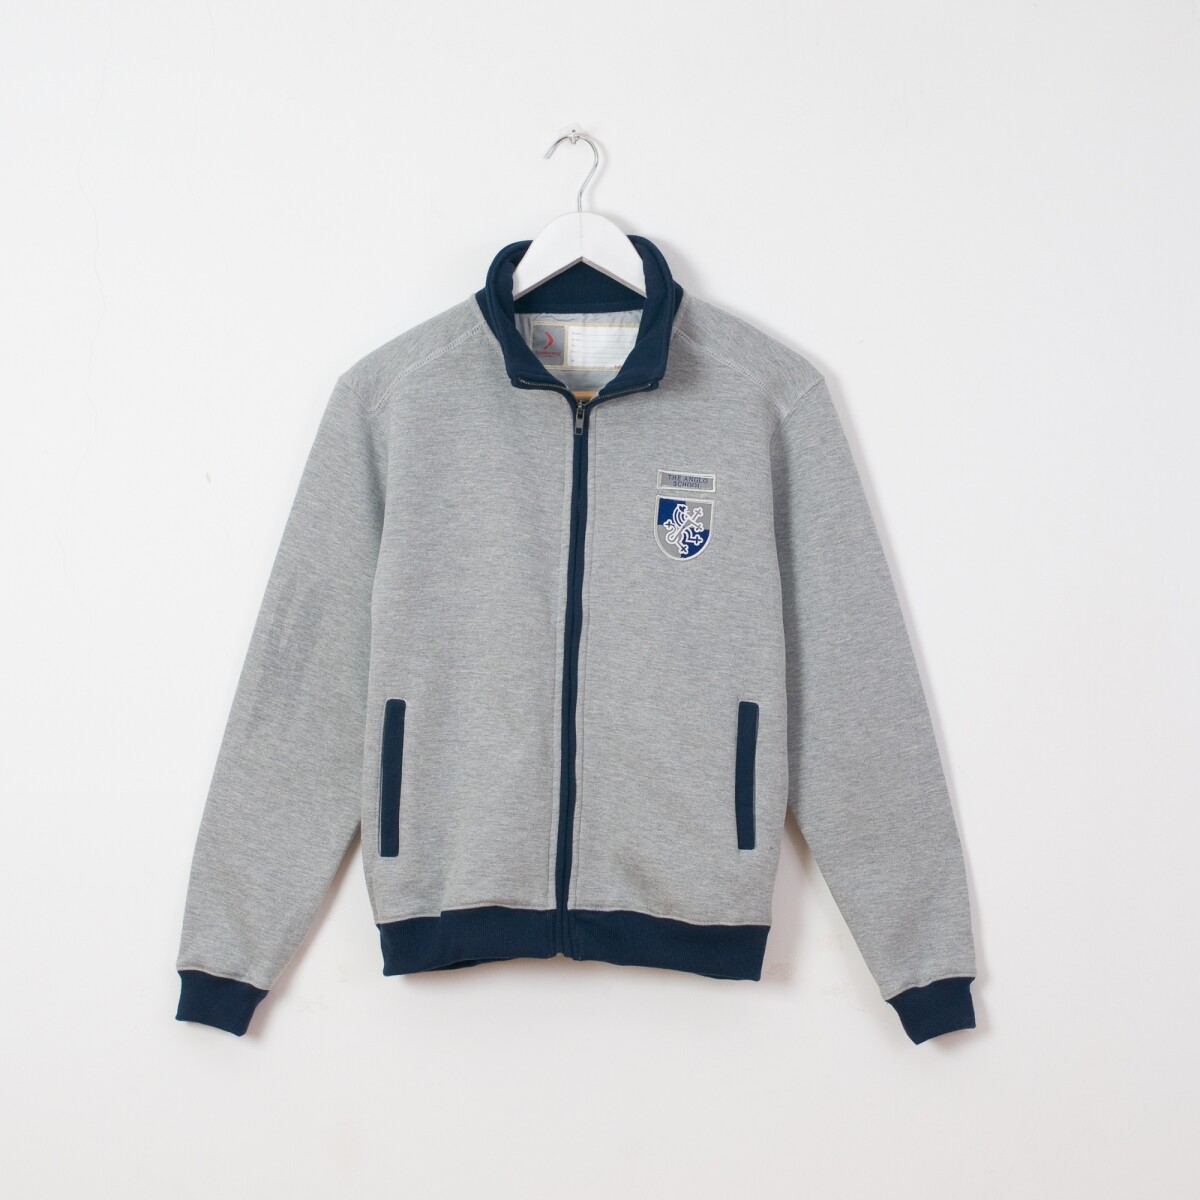 Campera deportiva The Anglo School Gris